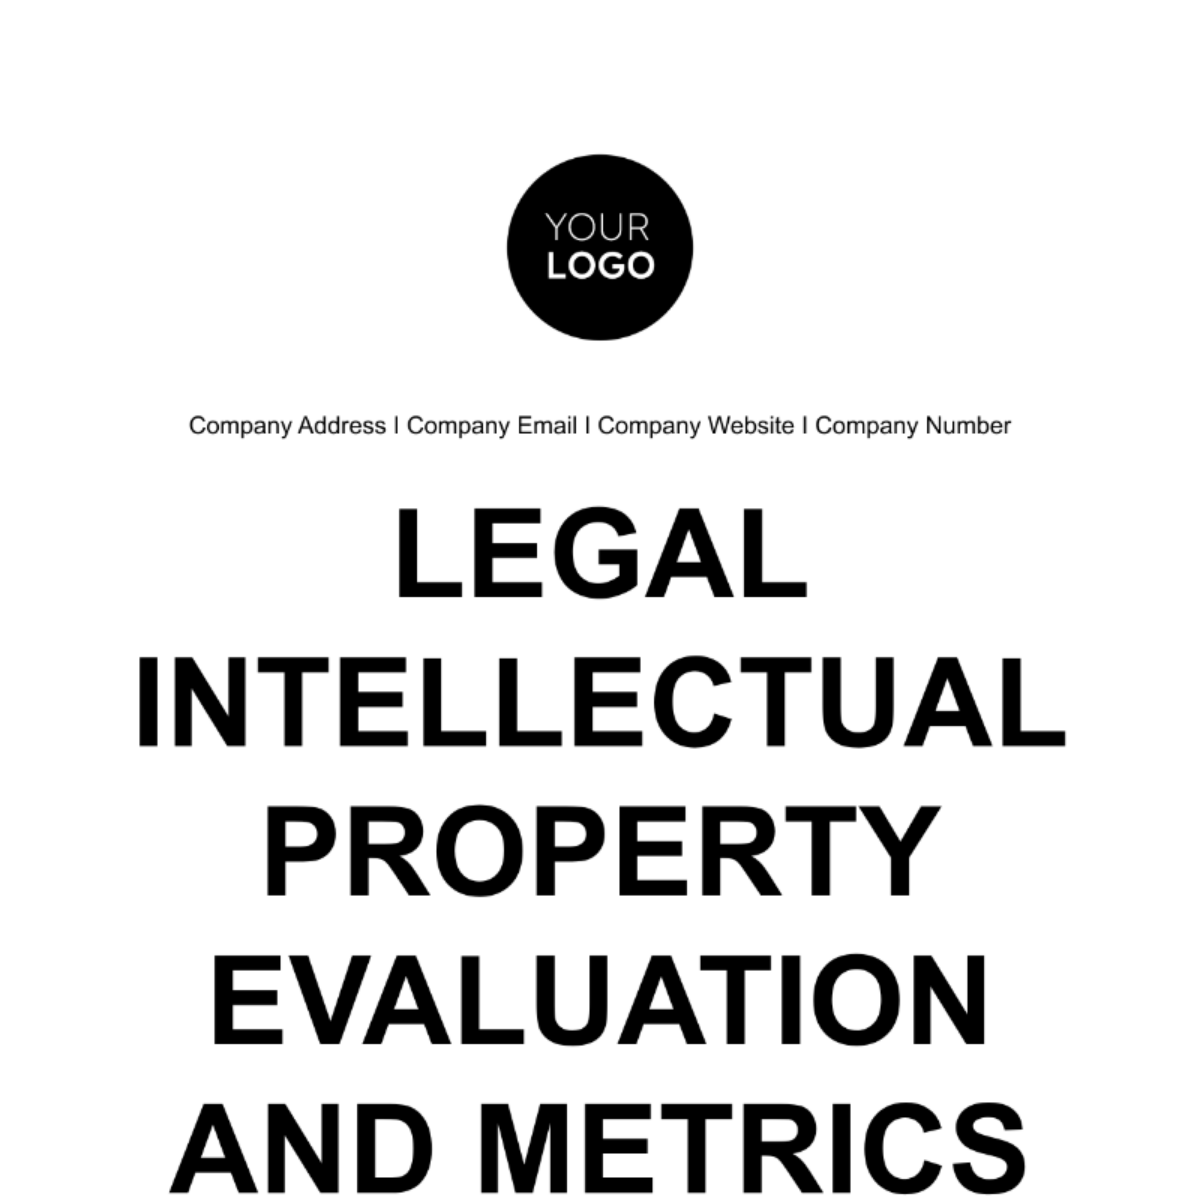 Legal Intellectual Property Evaluation and Metrics Manual Template